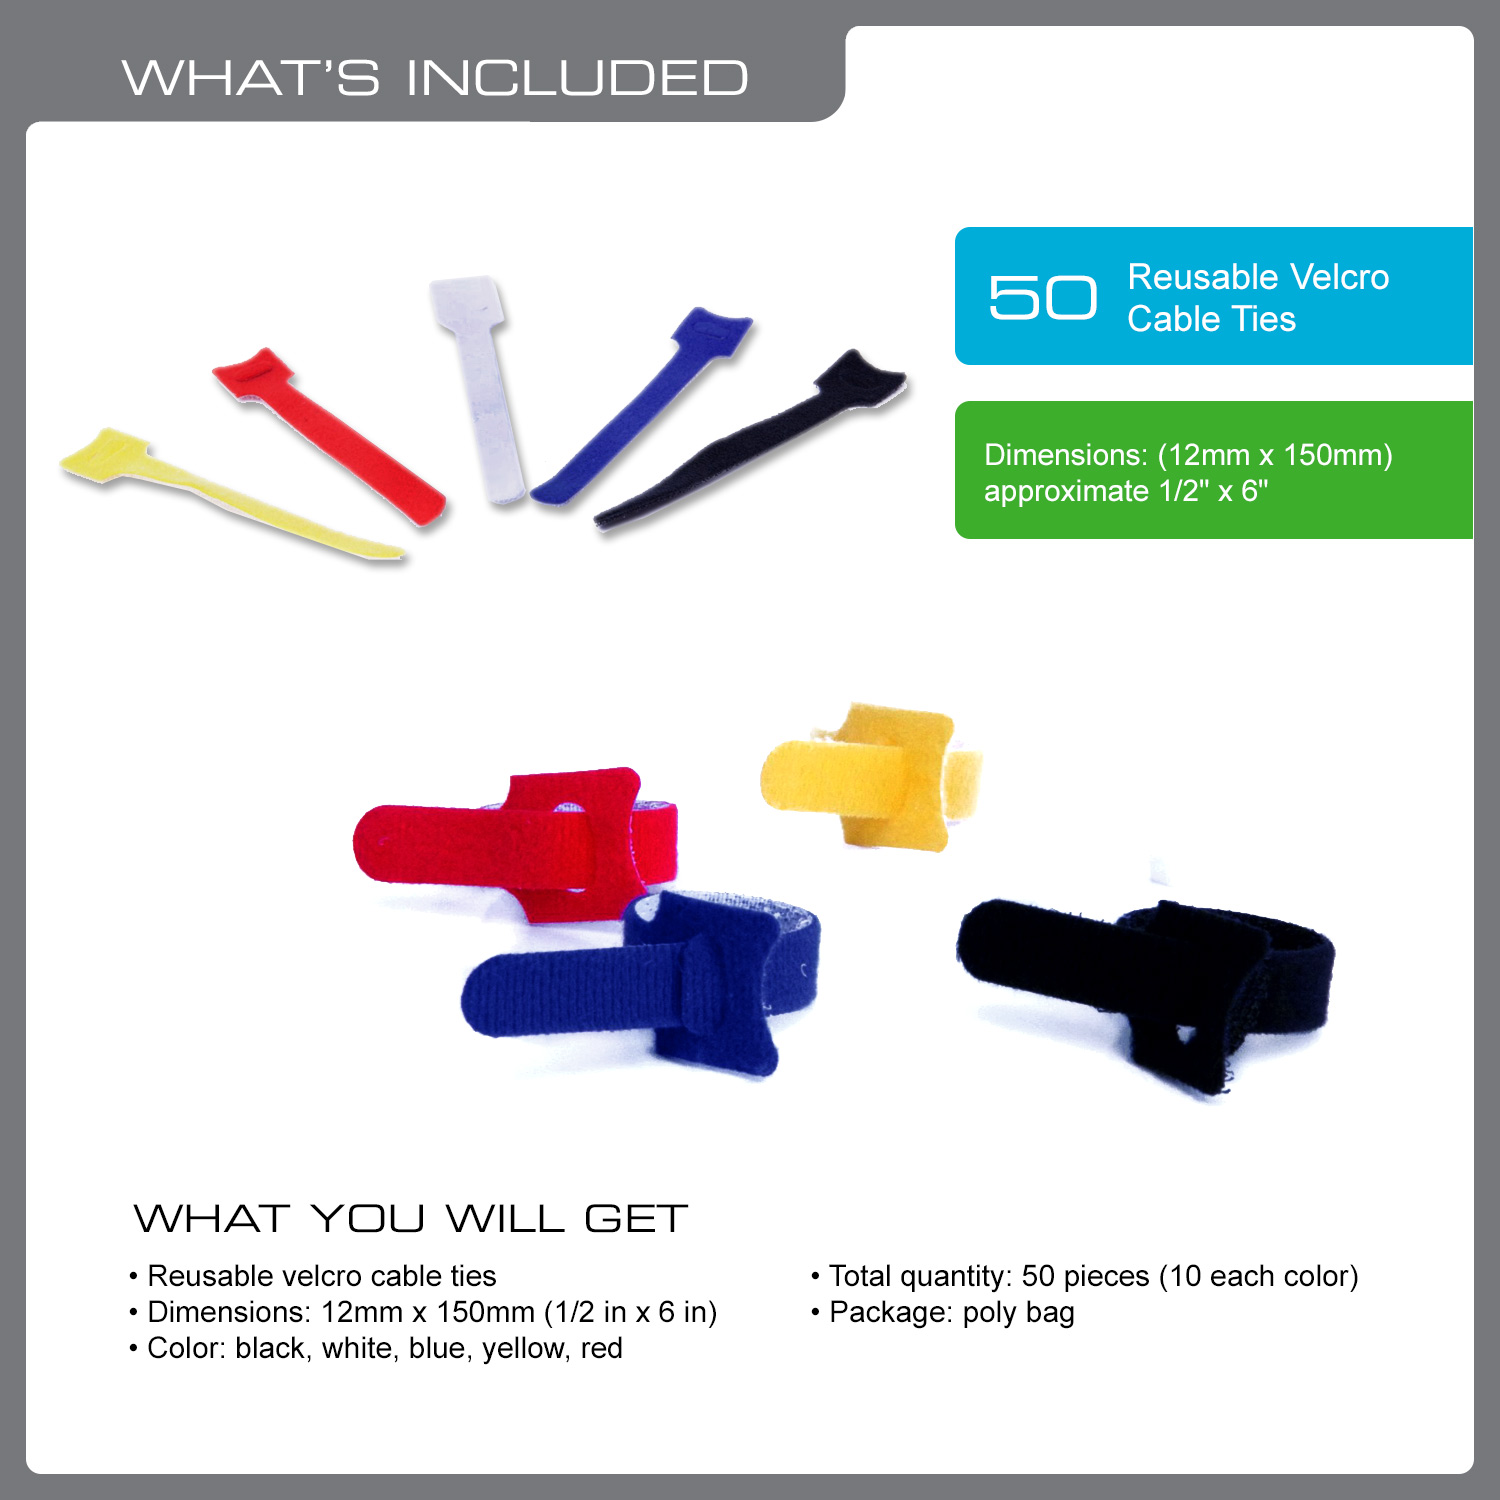 QualGear VT1-MC-50-P Self-Gripping cable ties, 1/2 x 6 Inches, Assorted, 50 Ties in Poly Bag Style.